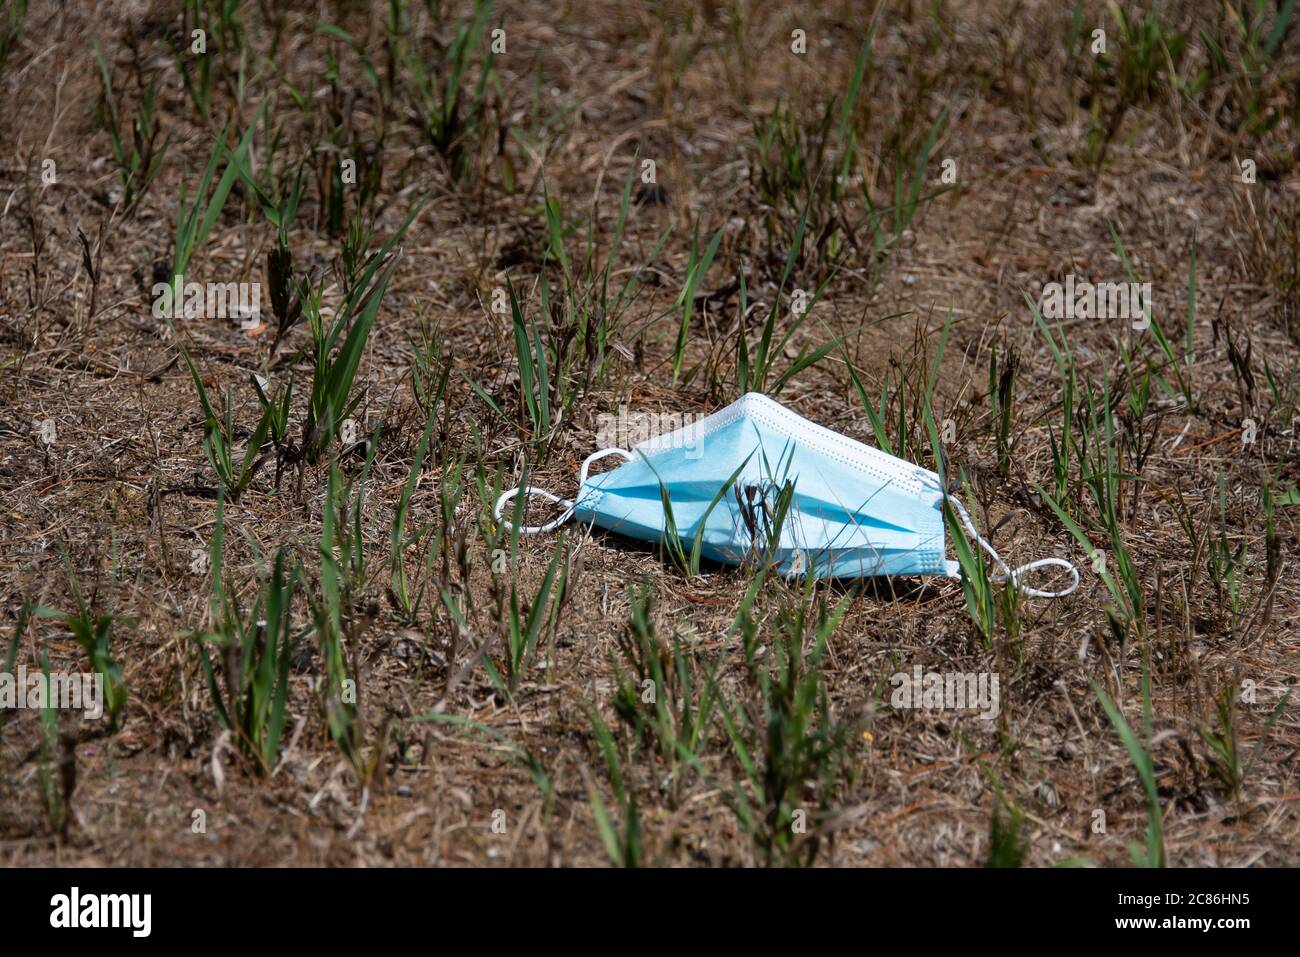 A used disposable face mast discarded in a grassy area. Stock Photo